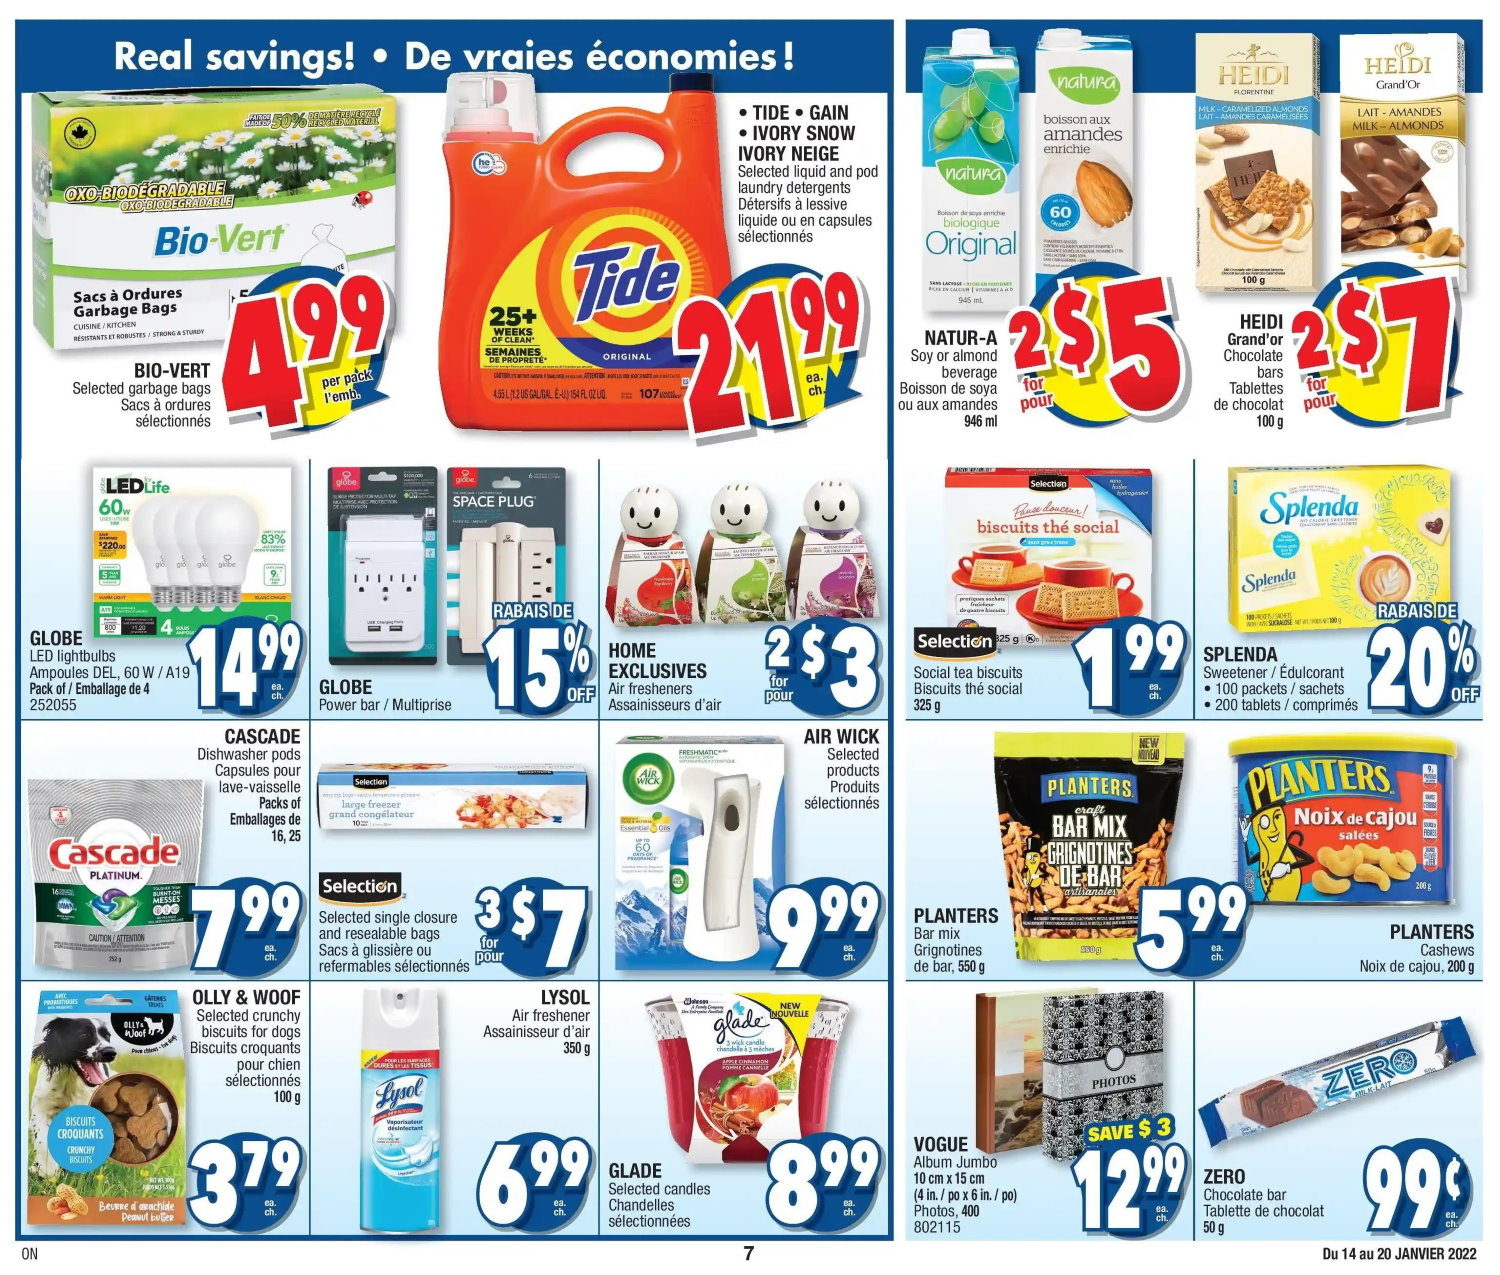 Jean Coutu - Even More Savings - Weekly Flyer Specials - Page 7